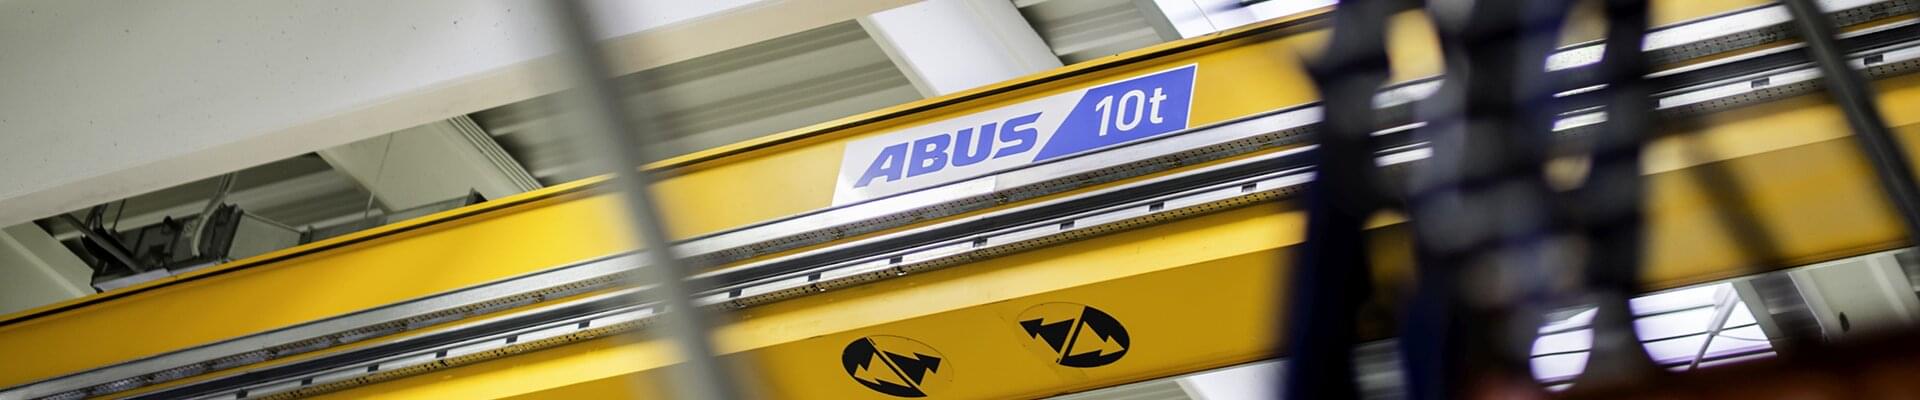 High quality ABUS cranes in enlarged production hall of the company Multinorm